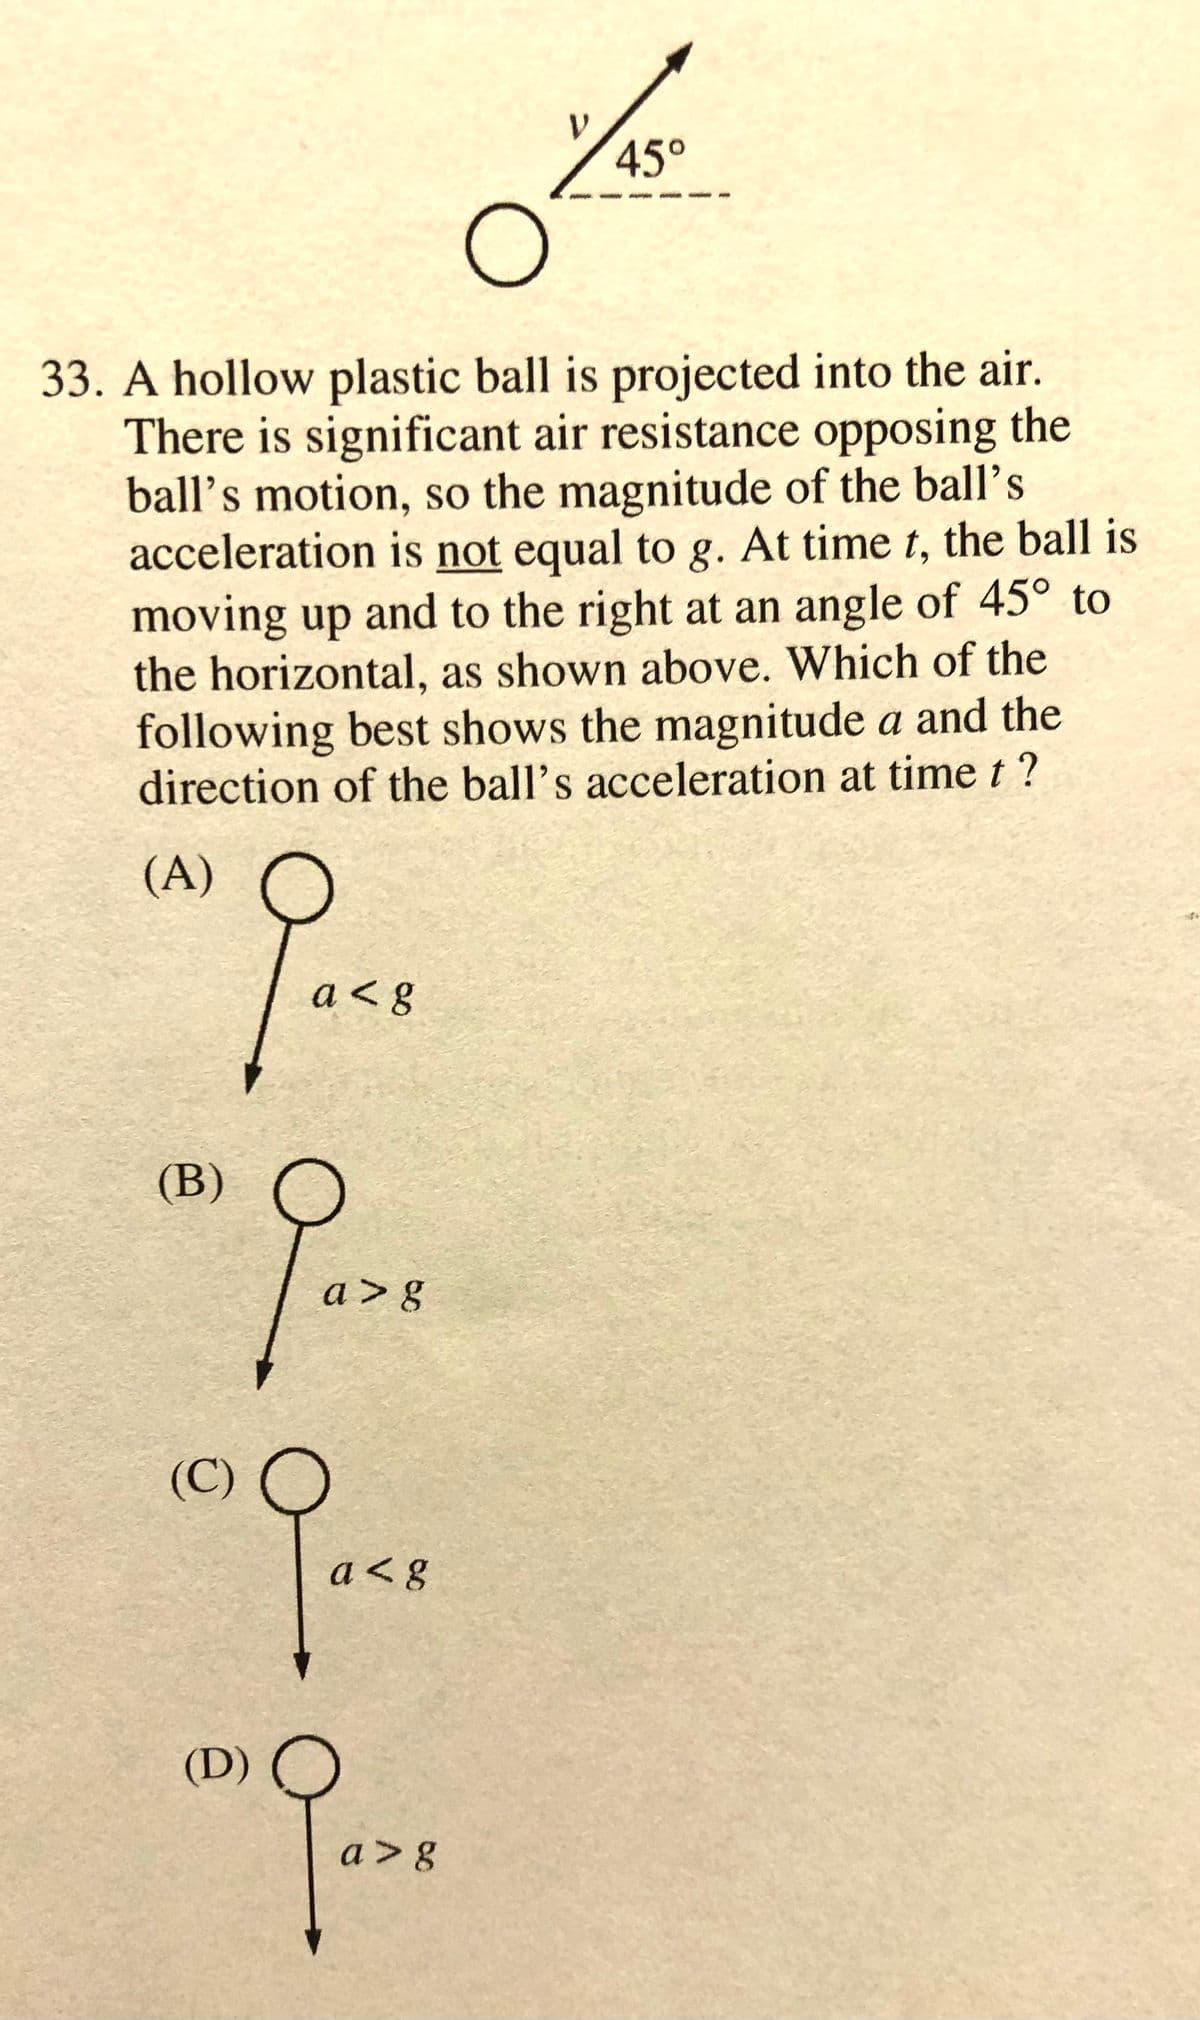 45°
33. A hollow plastic ball is projected into the air.
There is significant air resistance opposing the
ball's motion, so the magnitude of the ball's
acceleration is not equal to g. At time t, the ball is
moving up and to the right at an angle of 45° to
the horizontal, as shown above. Which of the
following best shows the magnitude a and the
direction of the ball's acceleration at time t?
(А)
a< g
(B)
a > g
(С)
a< g
(D)
a> 8
